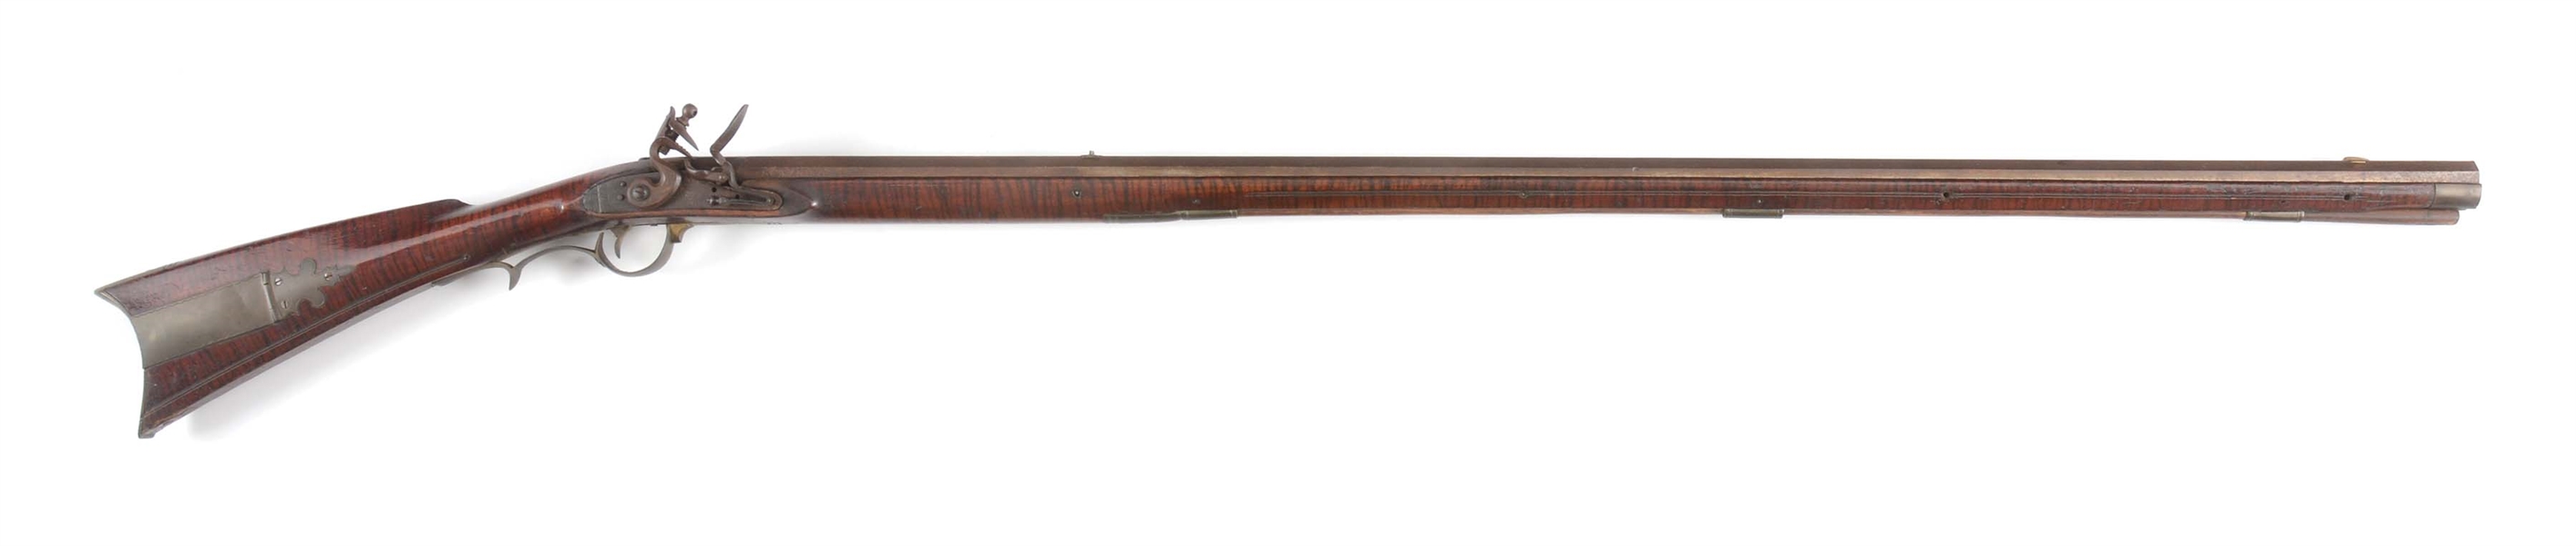 (A) FAUX STRIPE DECORATED KENTUCKY RIFLE SIGNED P&D MOLL.